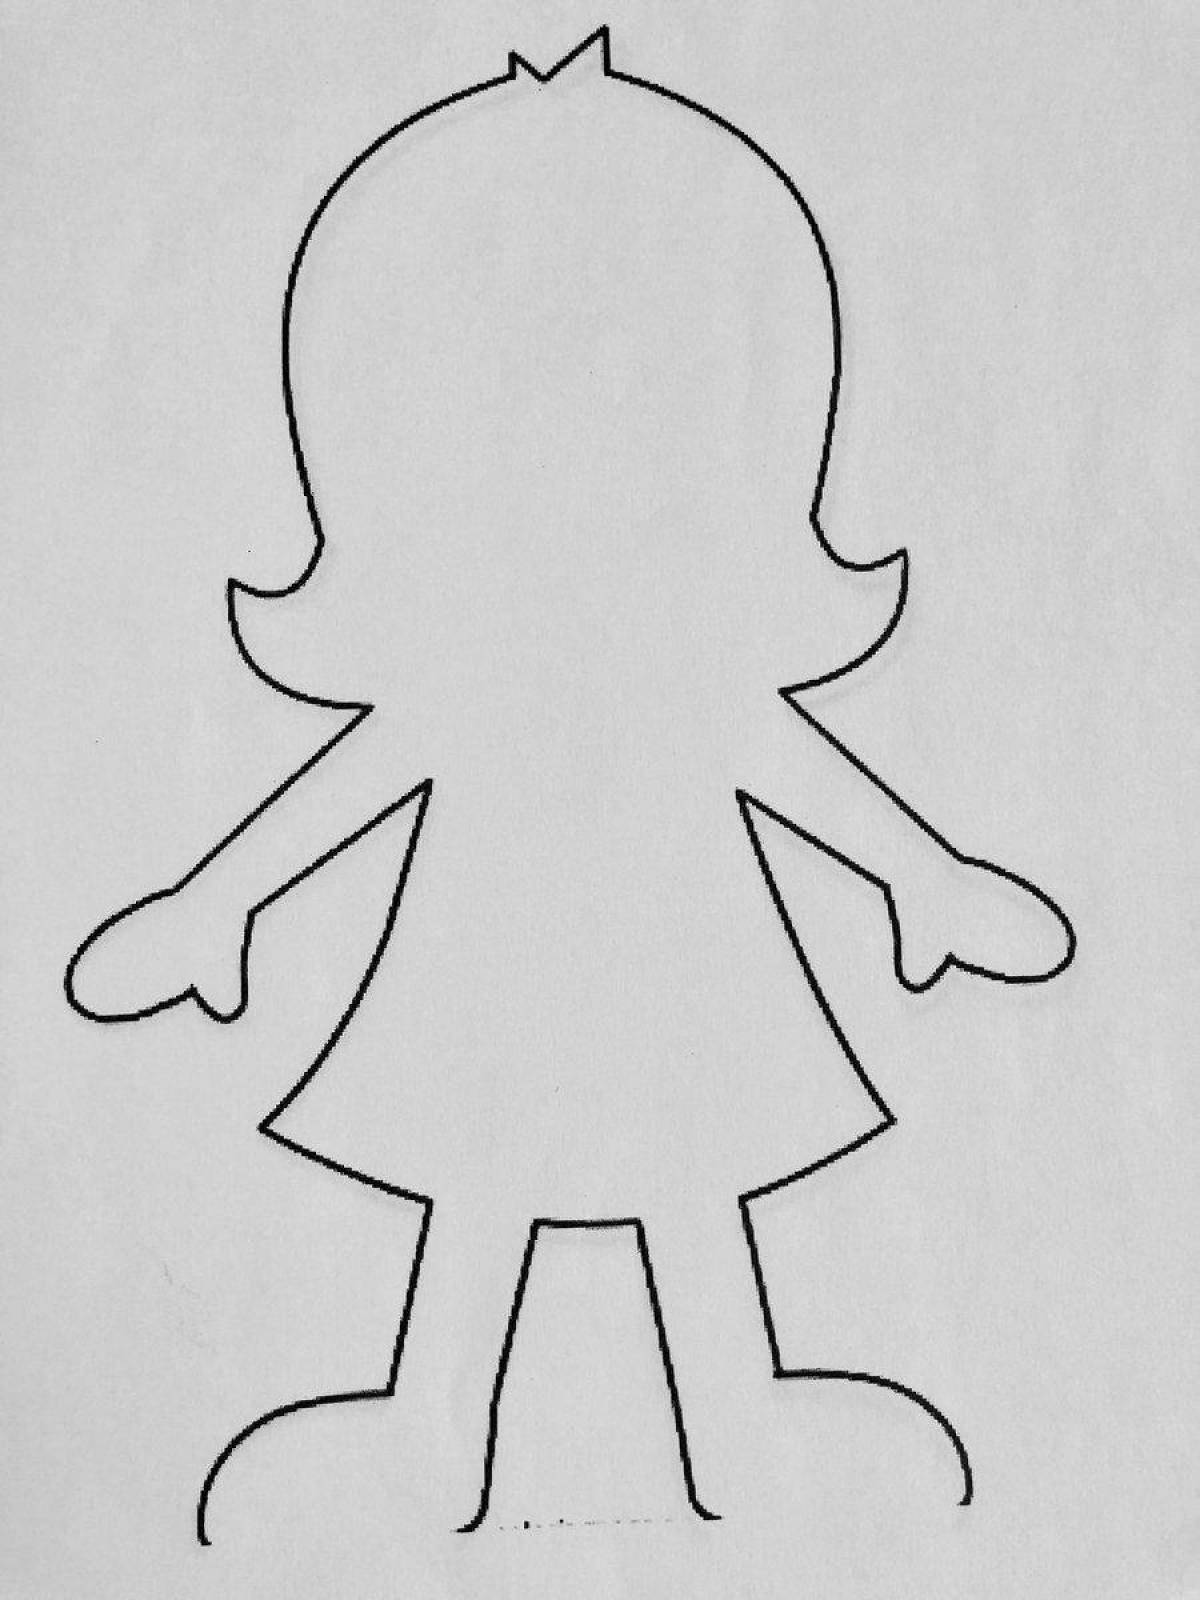 Playful coloring of a silhouette of a man for children